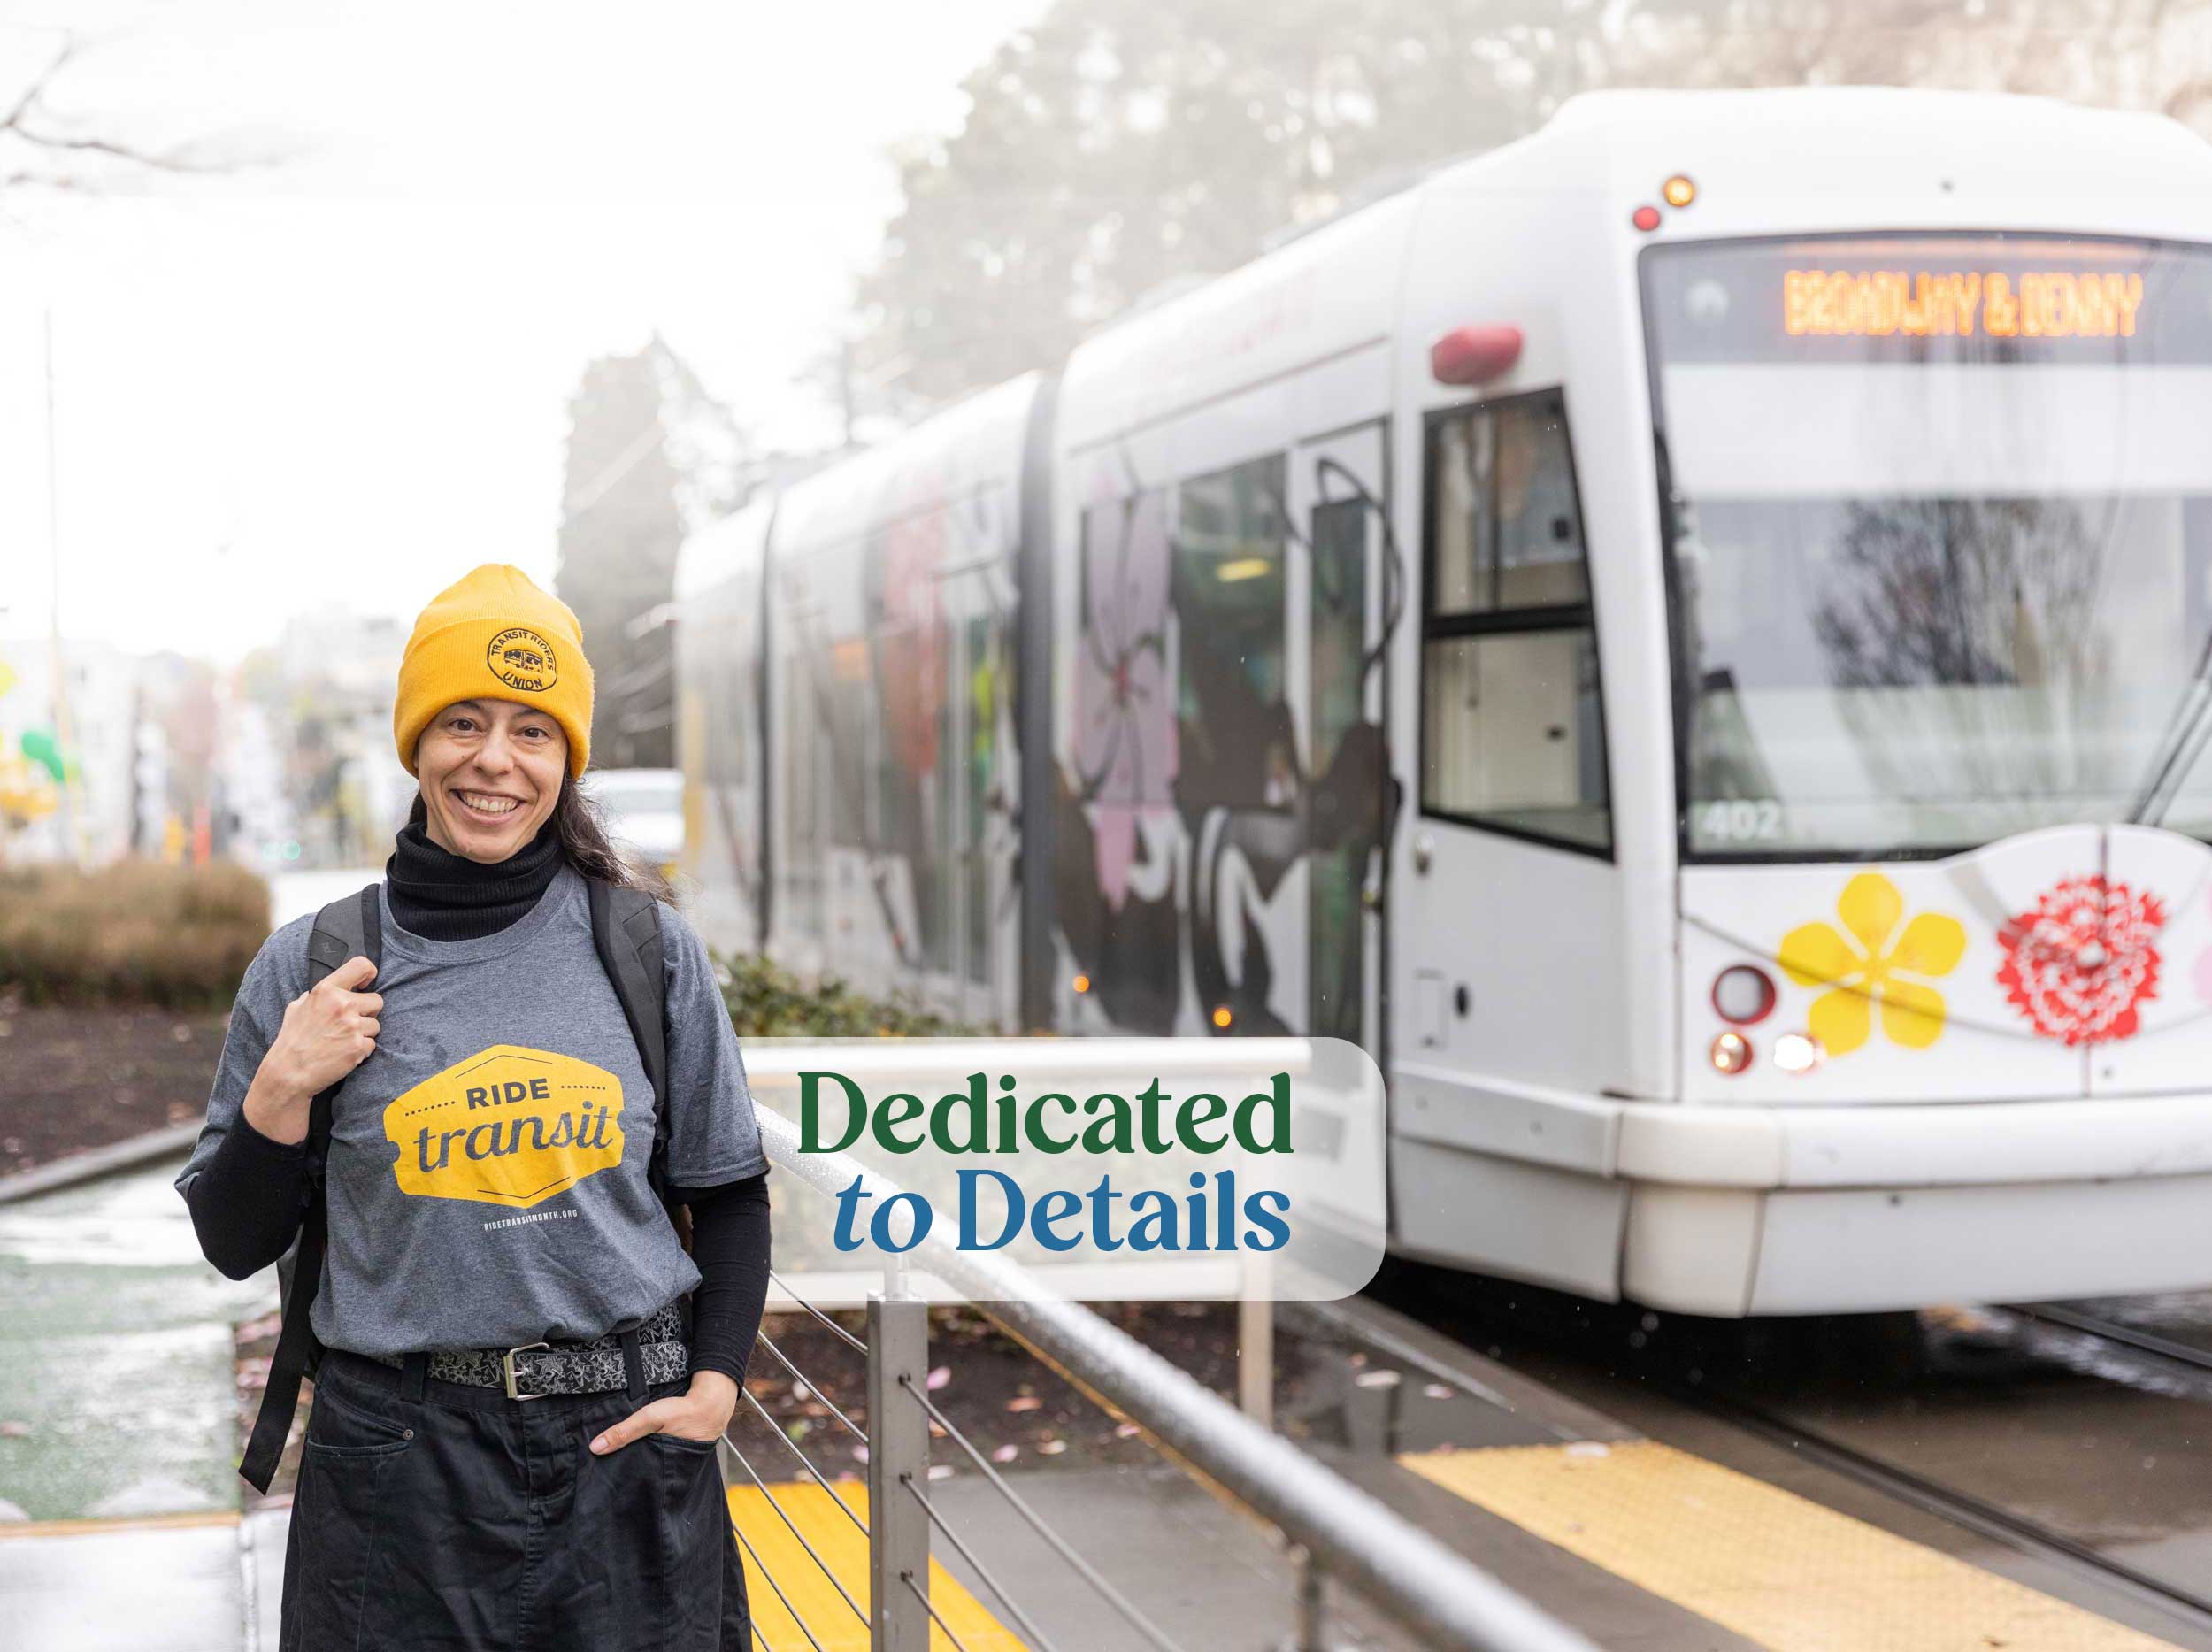 Saunatina Sanchez, candidate for Seattle City Council Position 6 stands in front of the Seattle Transit bus bound for Broadway & Denny.  She has long dark hair and dark eyes and is smiling.  She is wearing a Tranist Riders Union yellow colored beanie hat and a gray tshirt with a yellow Ride Tranist logo on it.